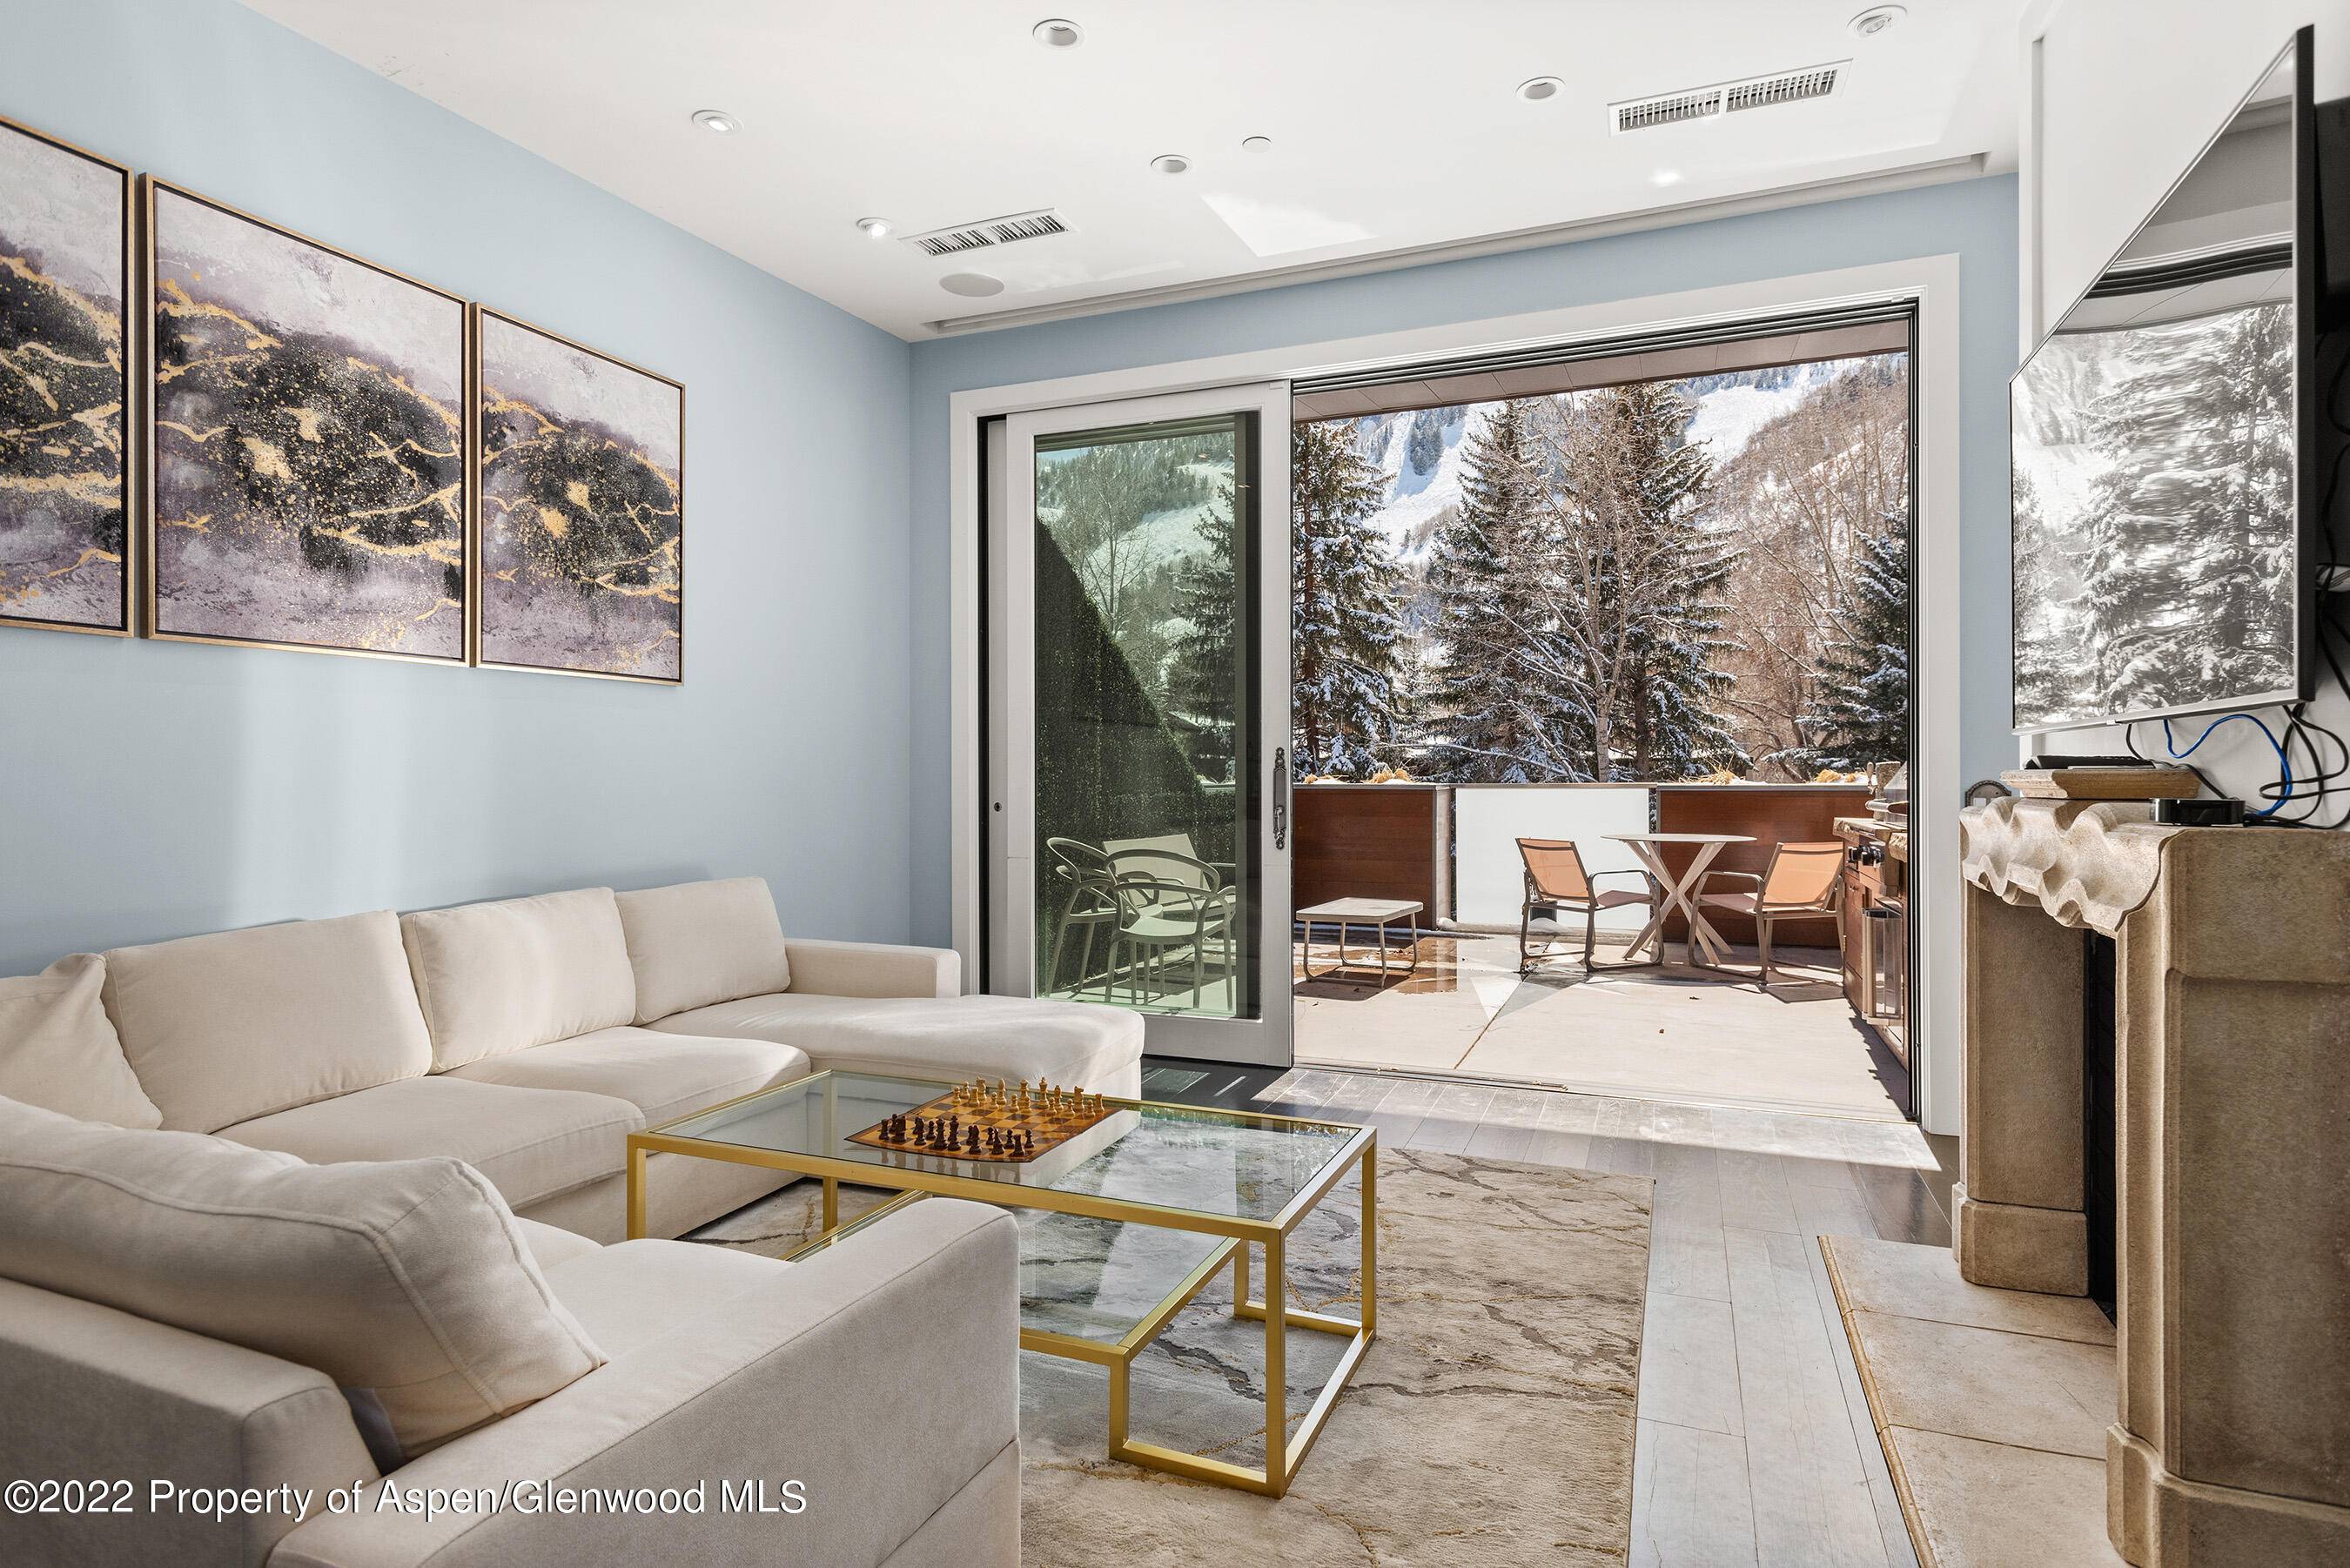 A location ! 100 E Cooper Avenue 7 is in the coveted Der Berghof building on the top floor corner with 3 bedrooms and 3 baths.